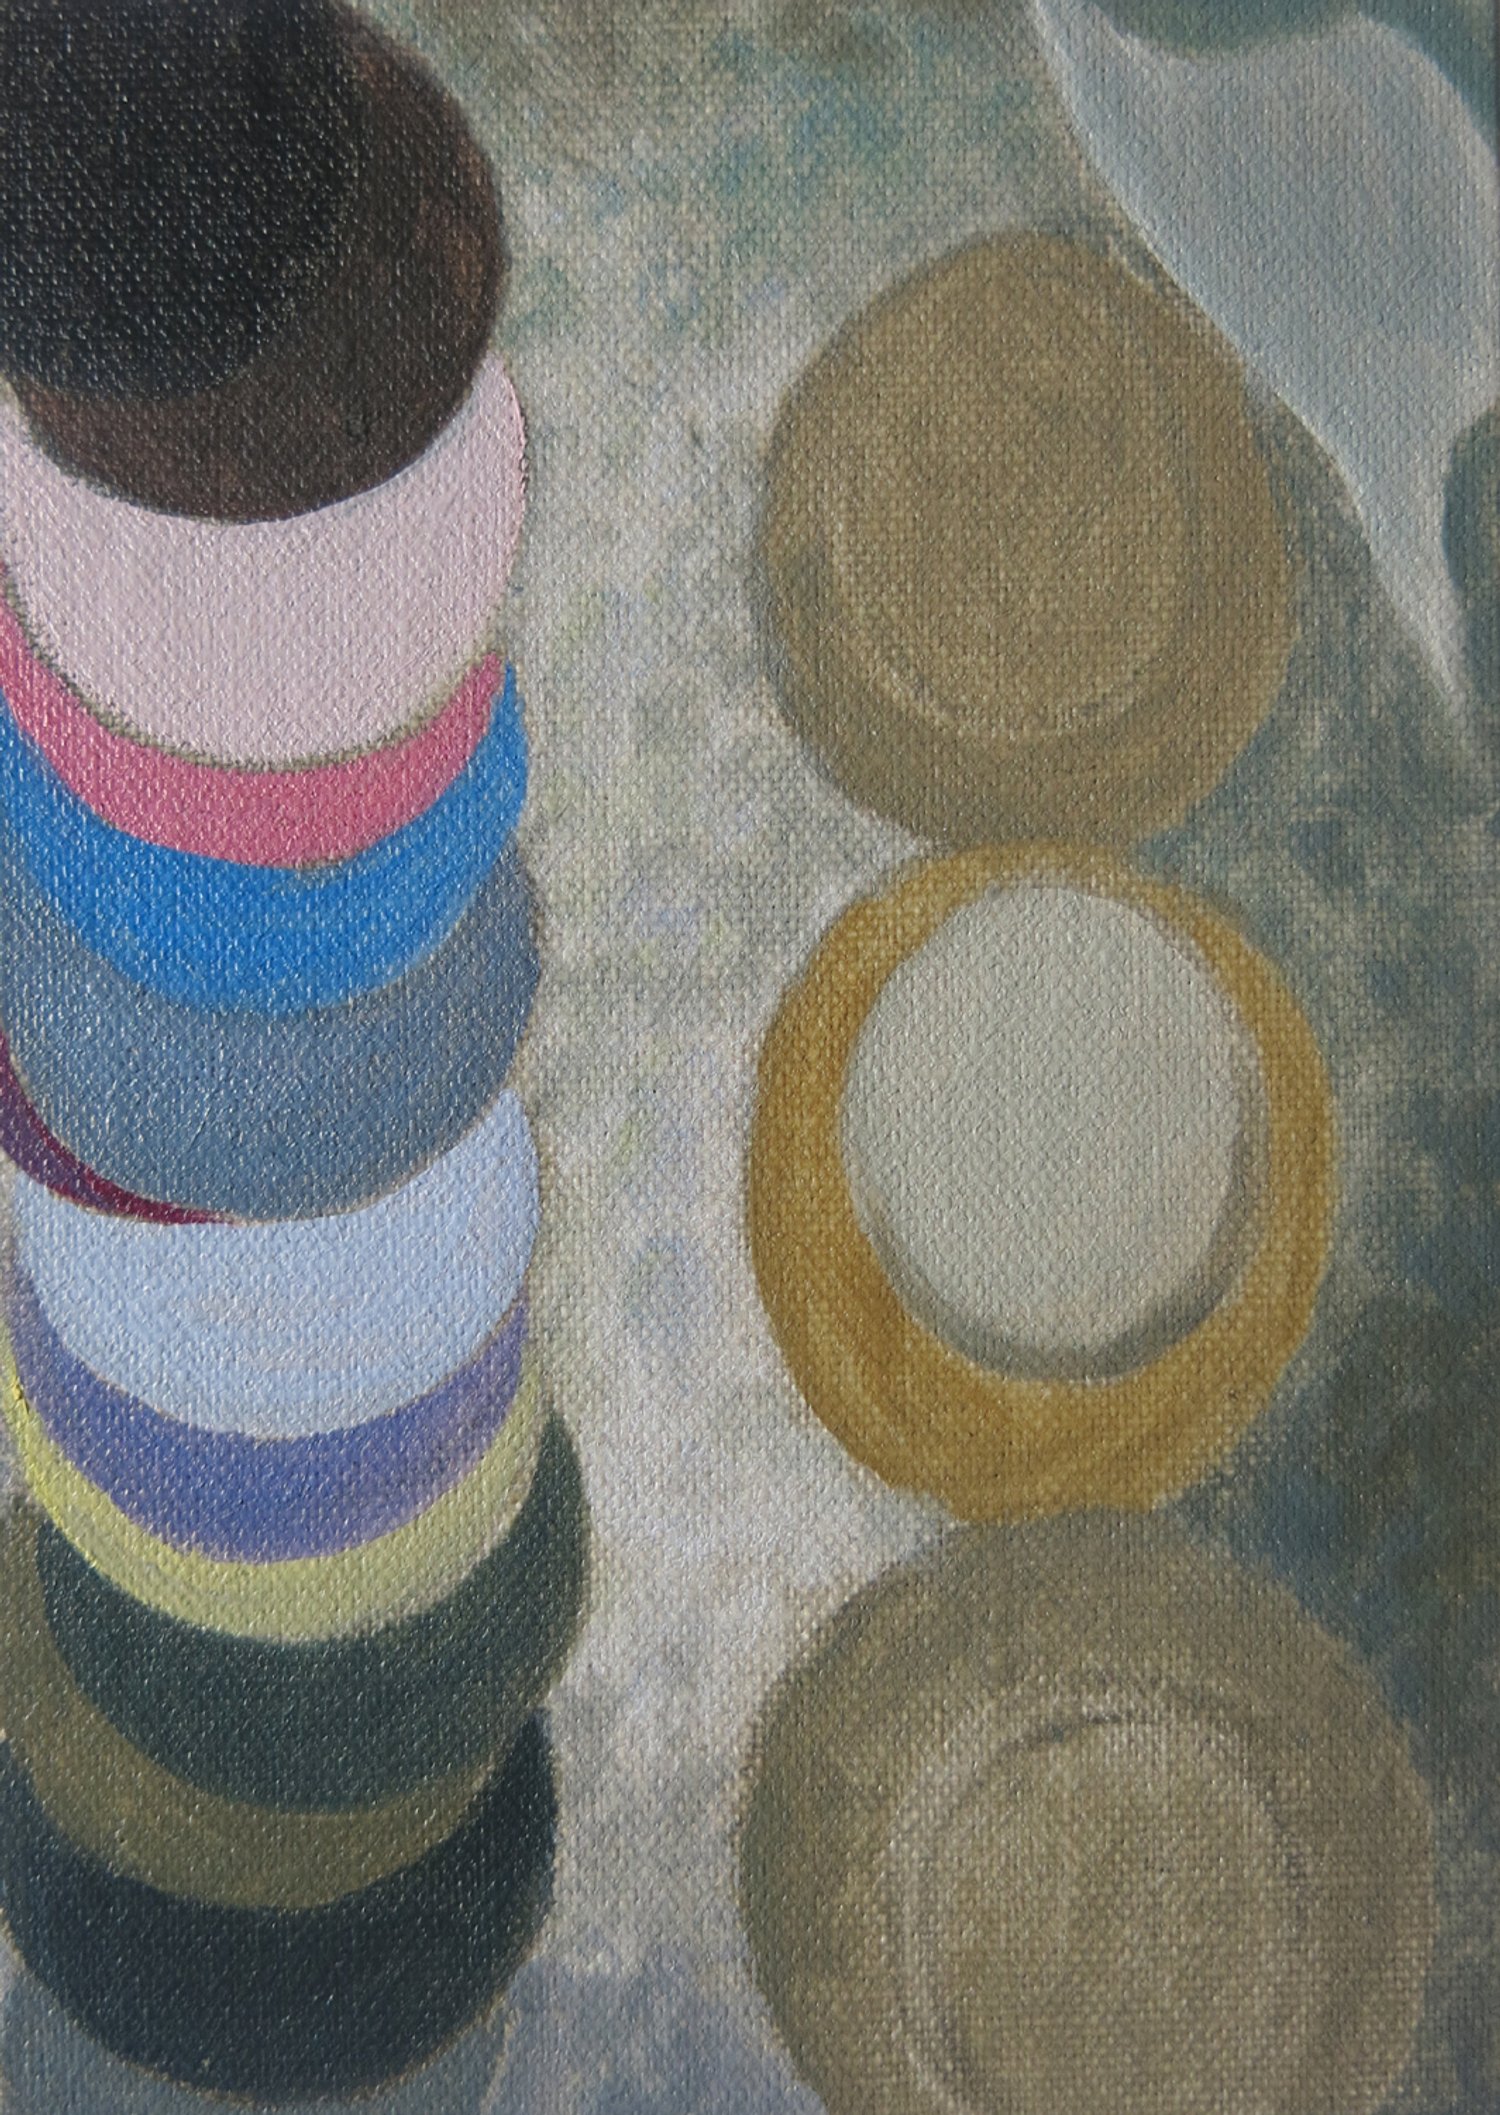   Hat shop    2022, oil on canvas board, 18 x 13cm  